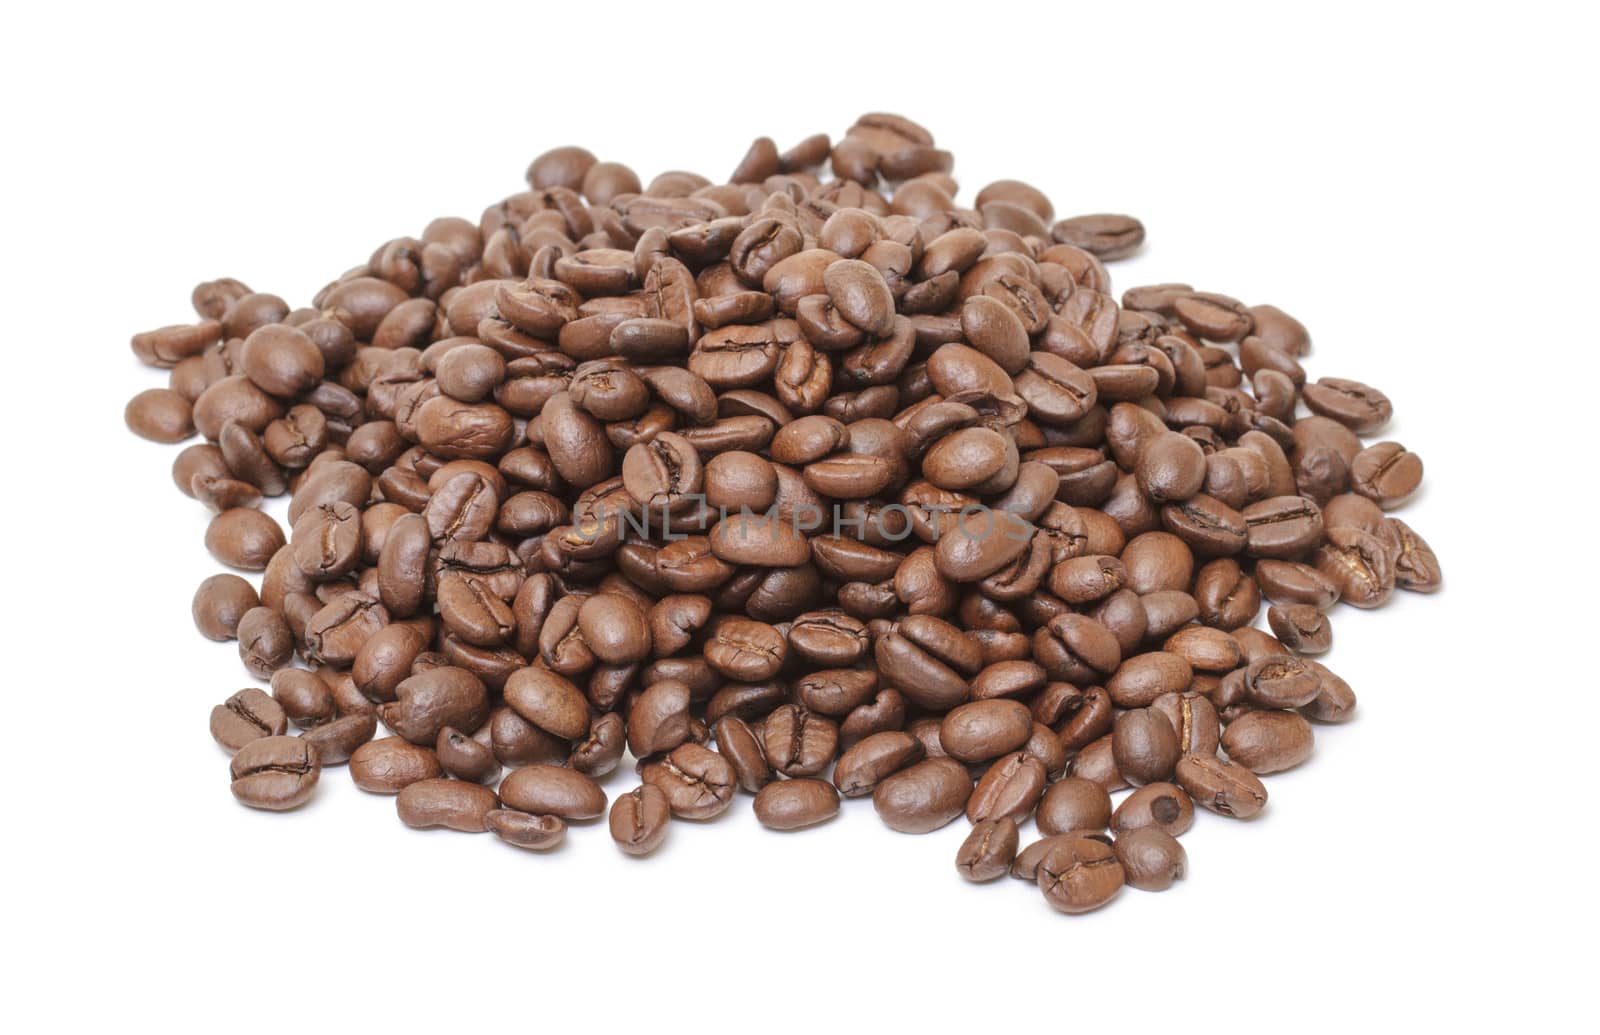 Heap of coffee beans, isolated on white background